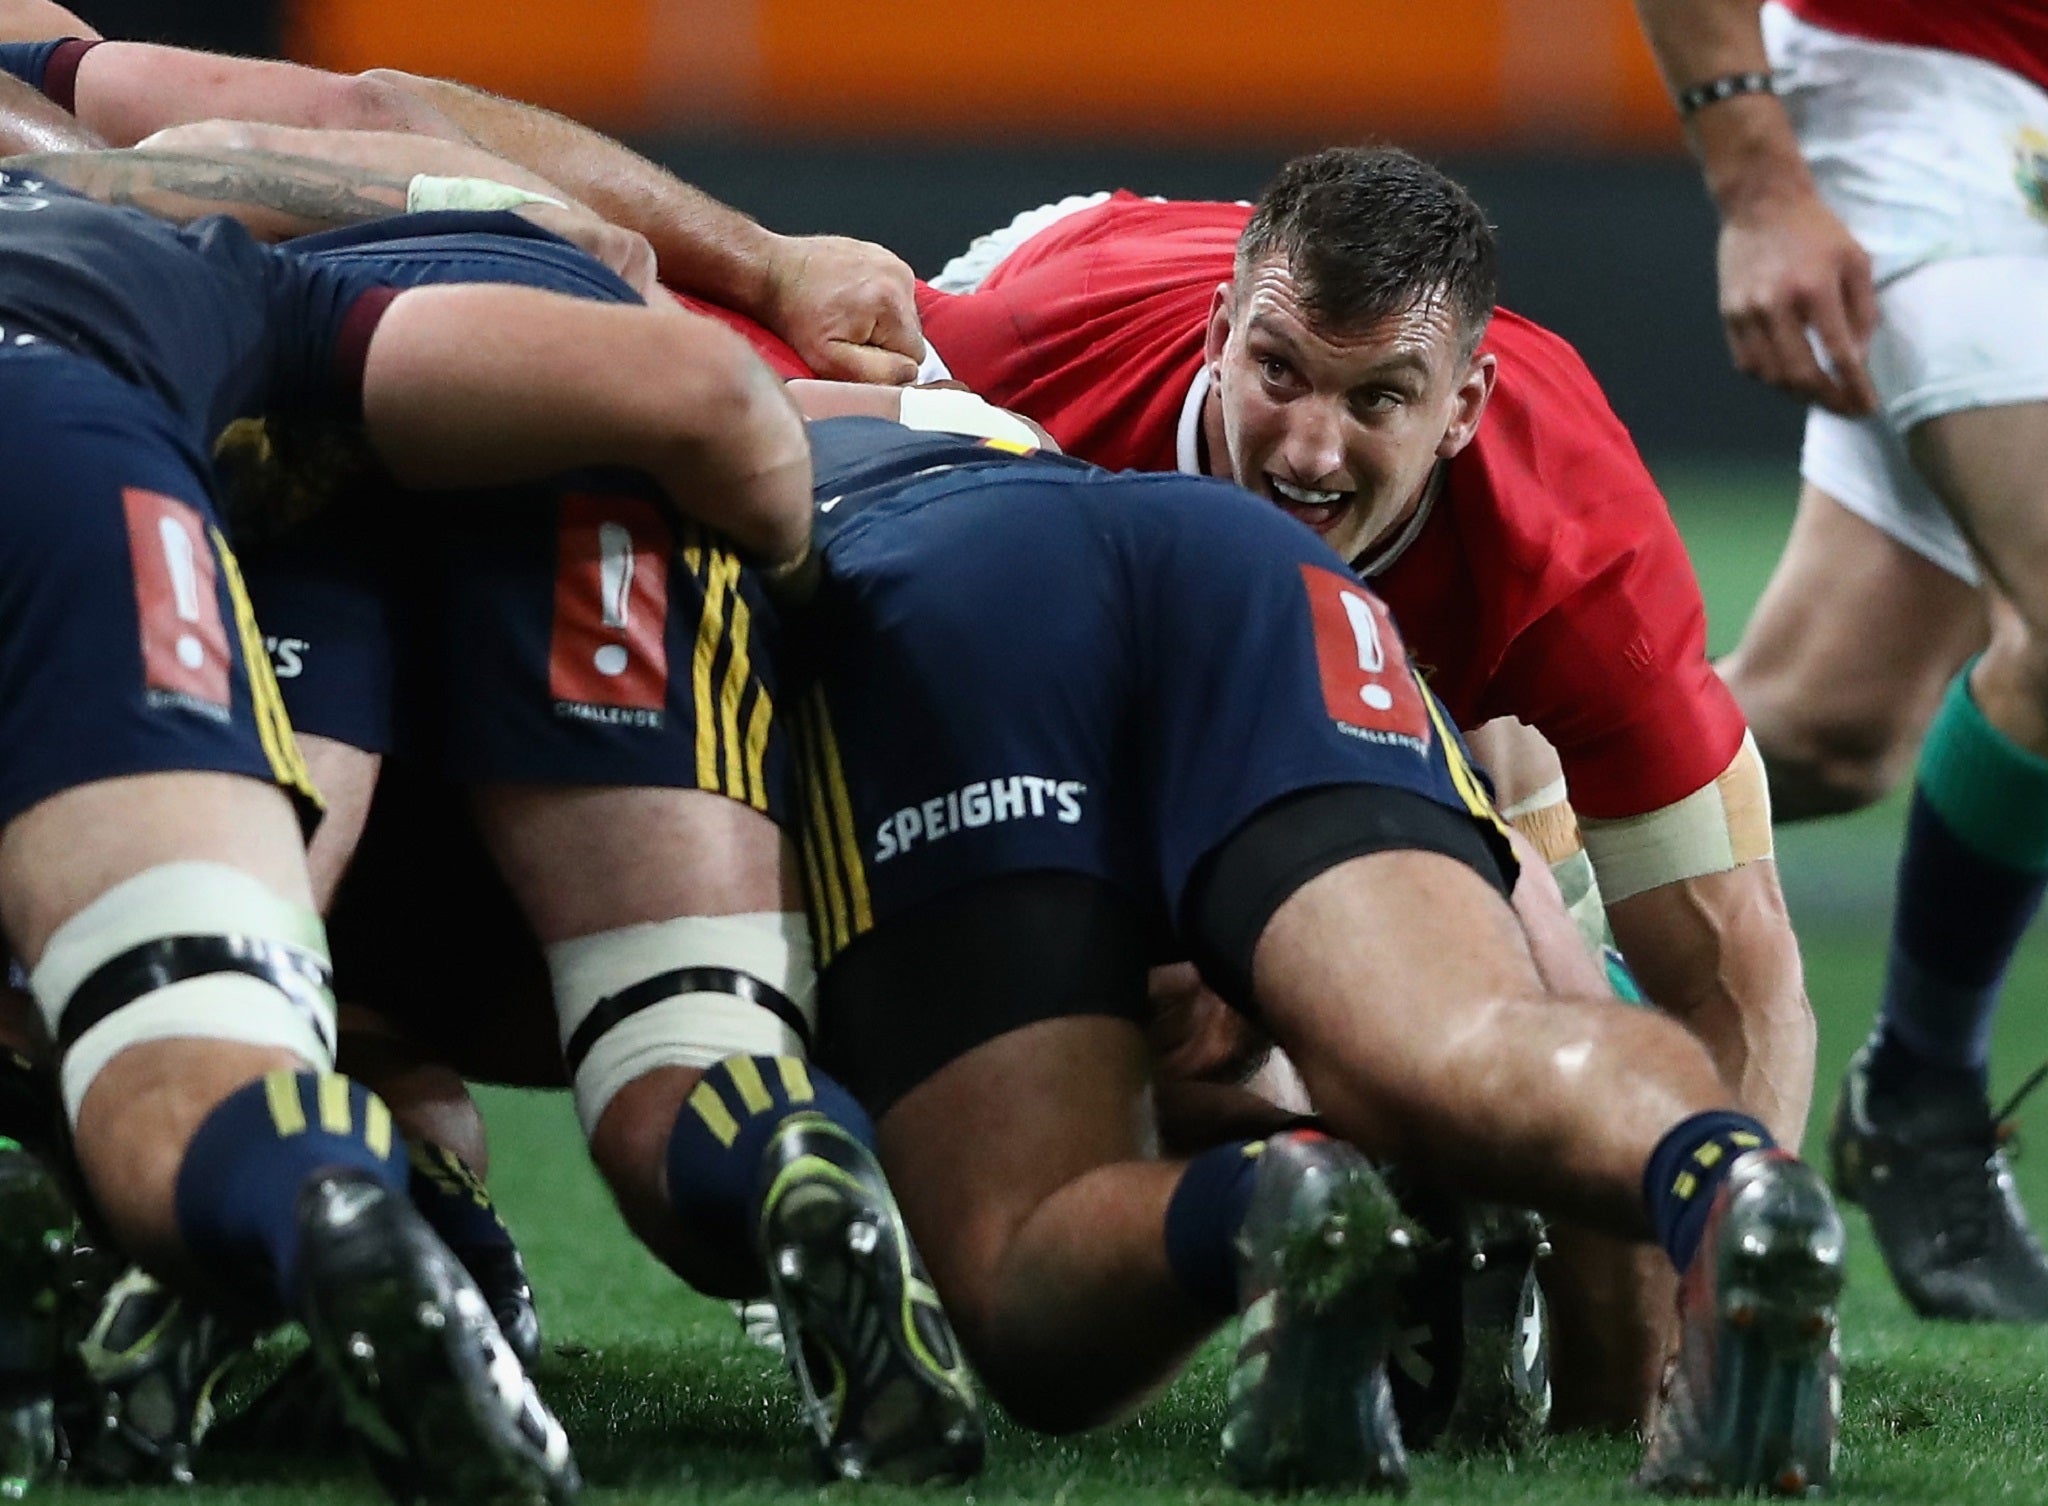 Sam Warburton looks poised to start the first Test against the All Blacks